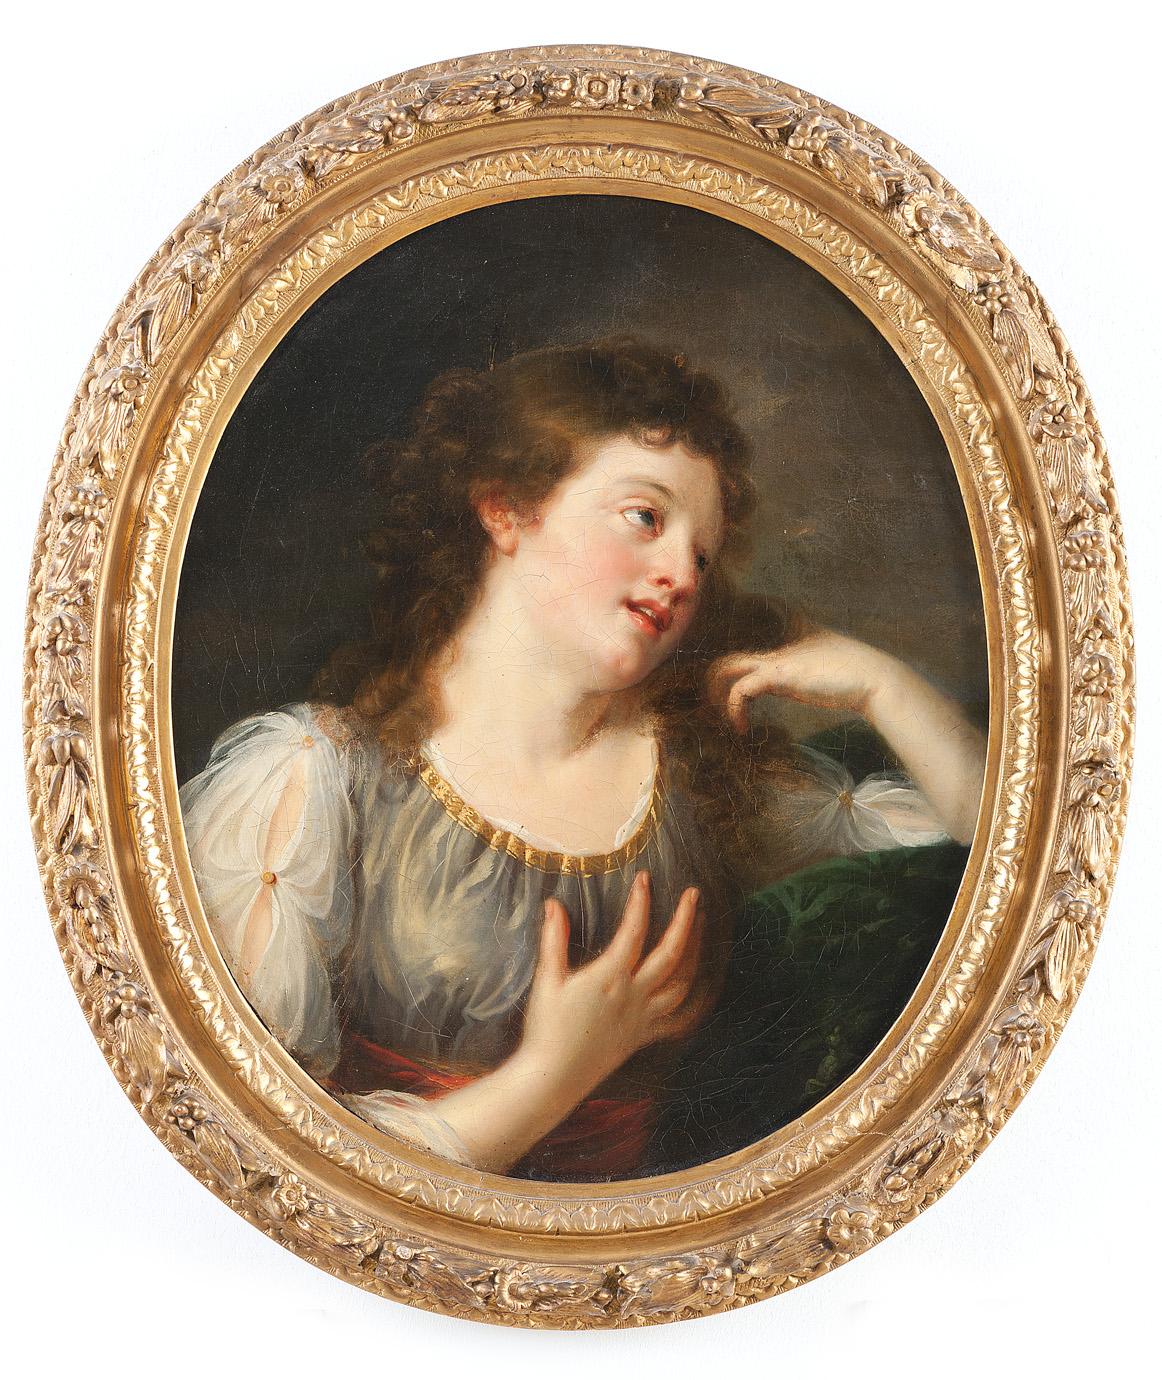 French School, Portrait of a Lady, Actress, Young Woman, French , Rococo, Oval - Painting by Unknown